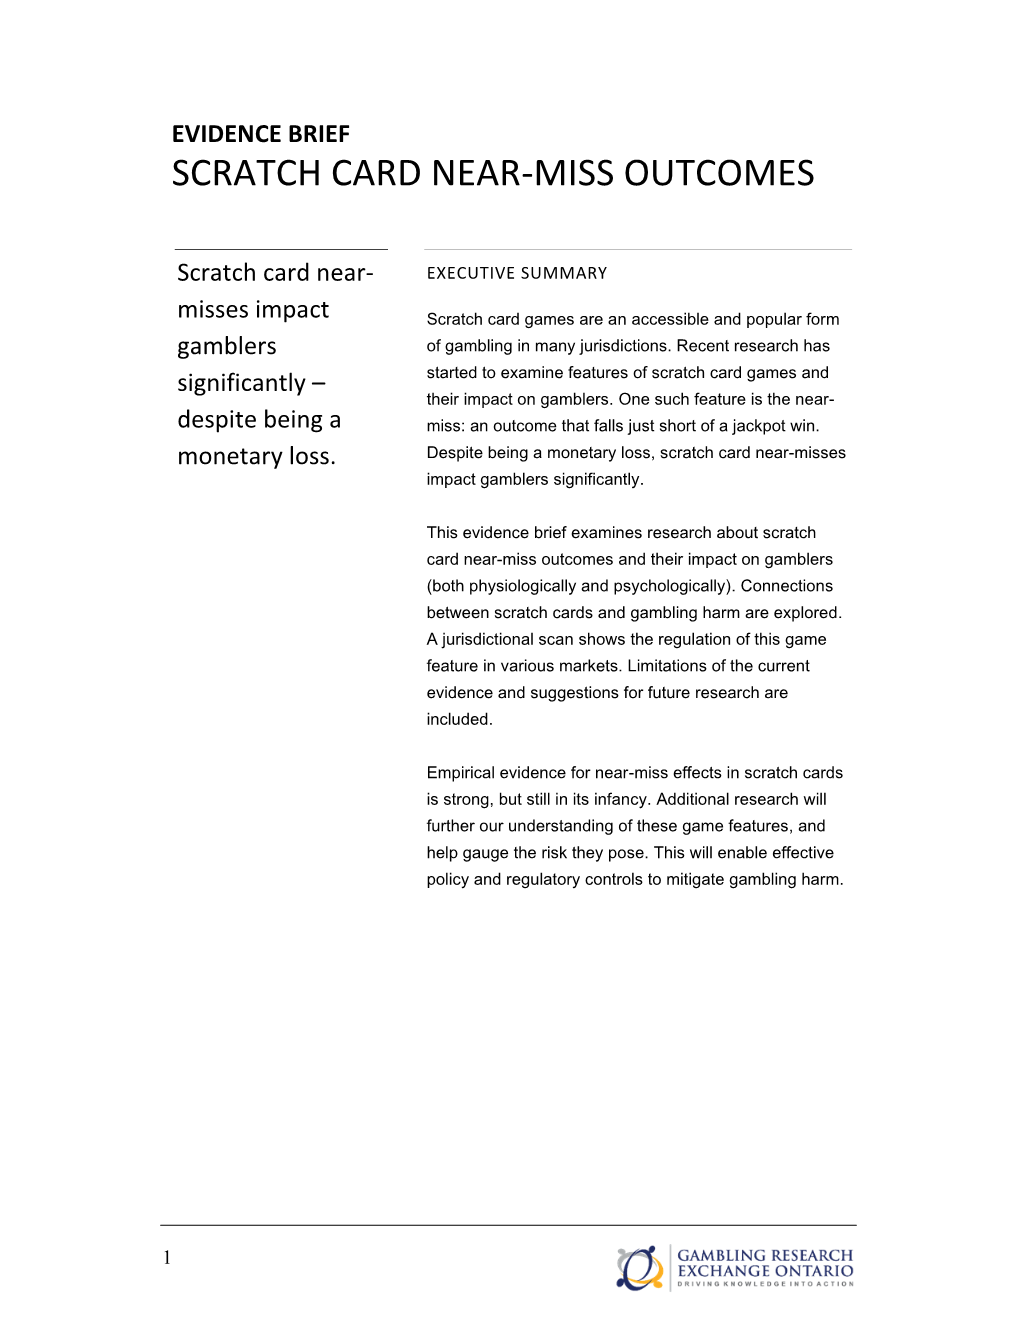 Evidence Brief: Scratch Card Near-Miss Outcomes